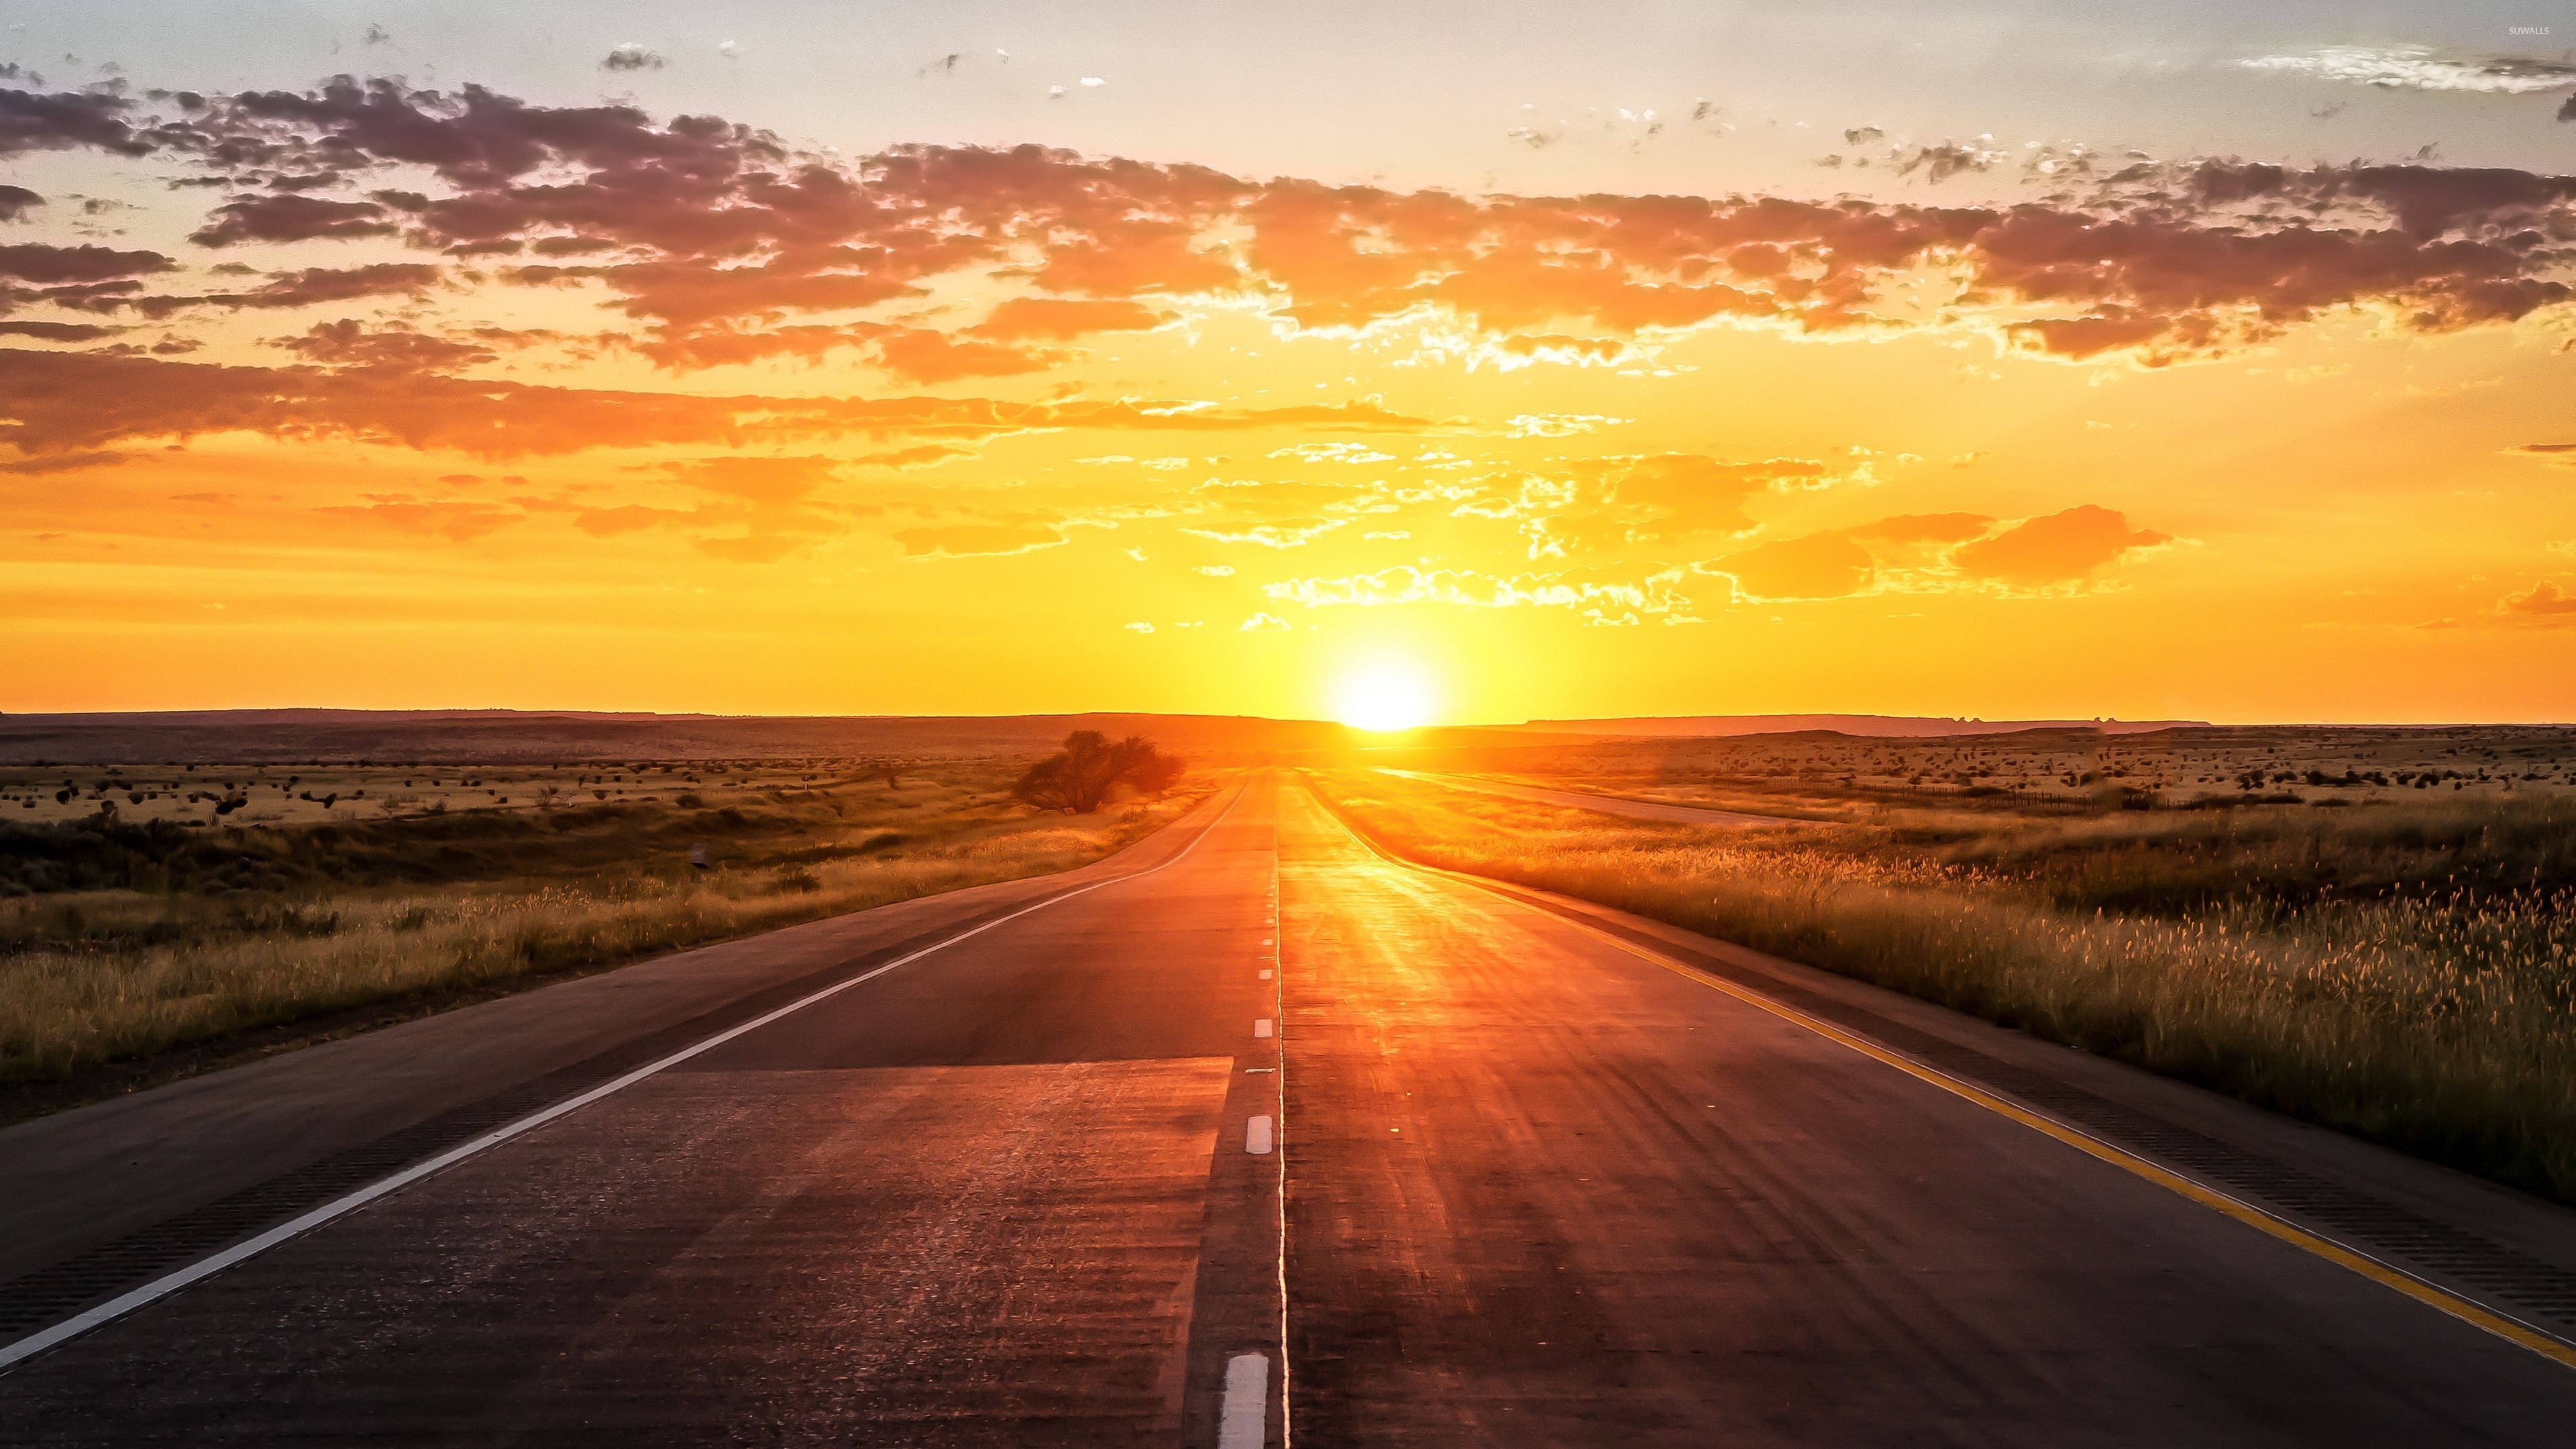 Road Towards The Golden Sunset Wallpaper - Road And Sunset , HD Wallpaper & Backgrounds